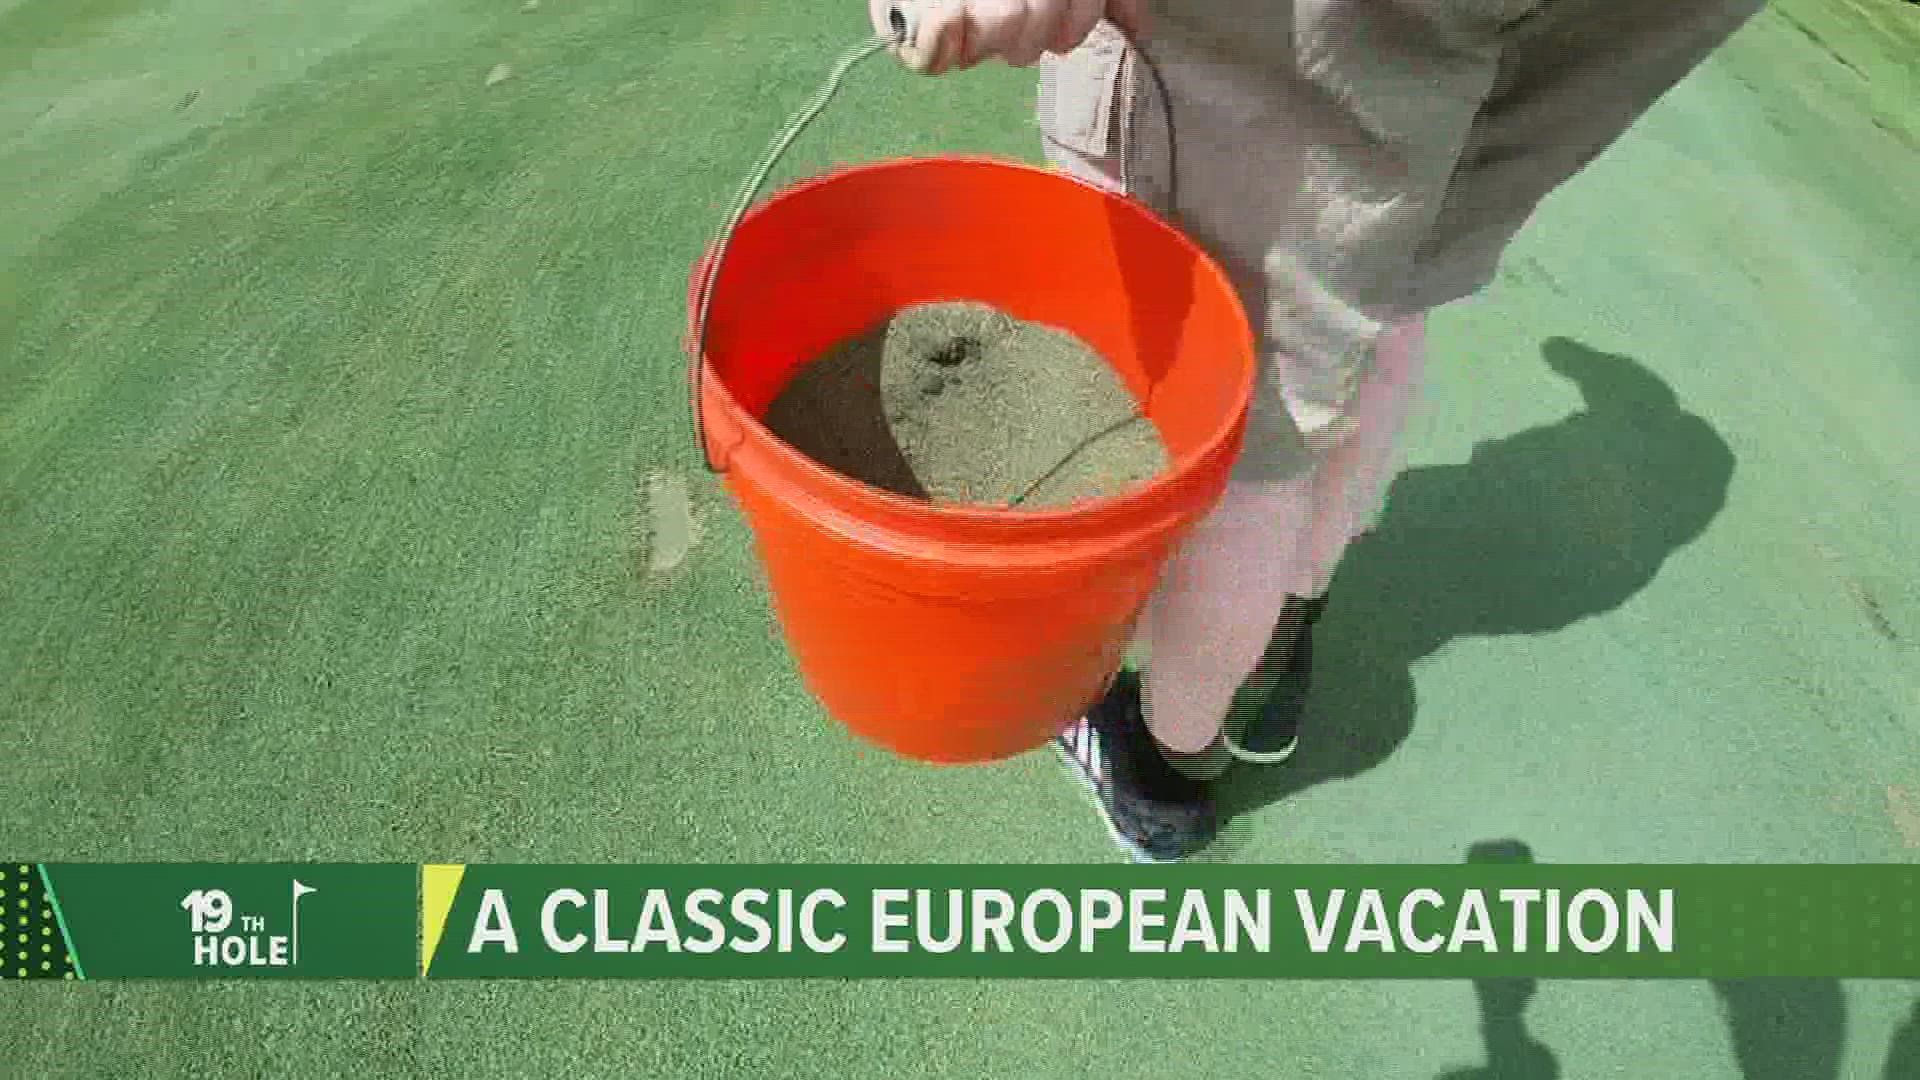 It's a "Classic" European vacation! Six workers from across Europe spent the JDC working with the grounds crews. After all, they say this tournament is 'magic.'